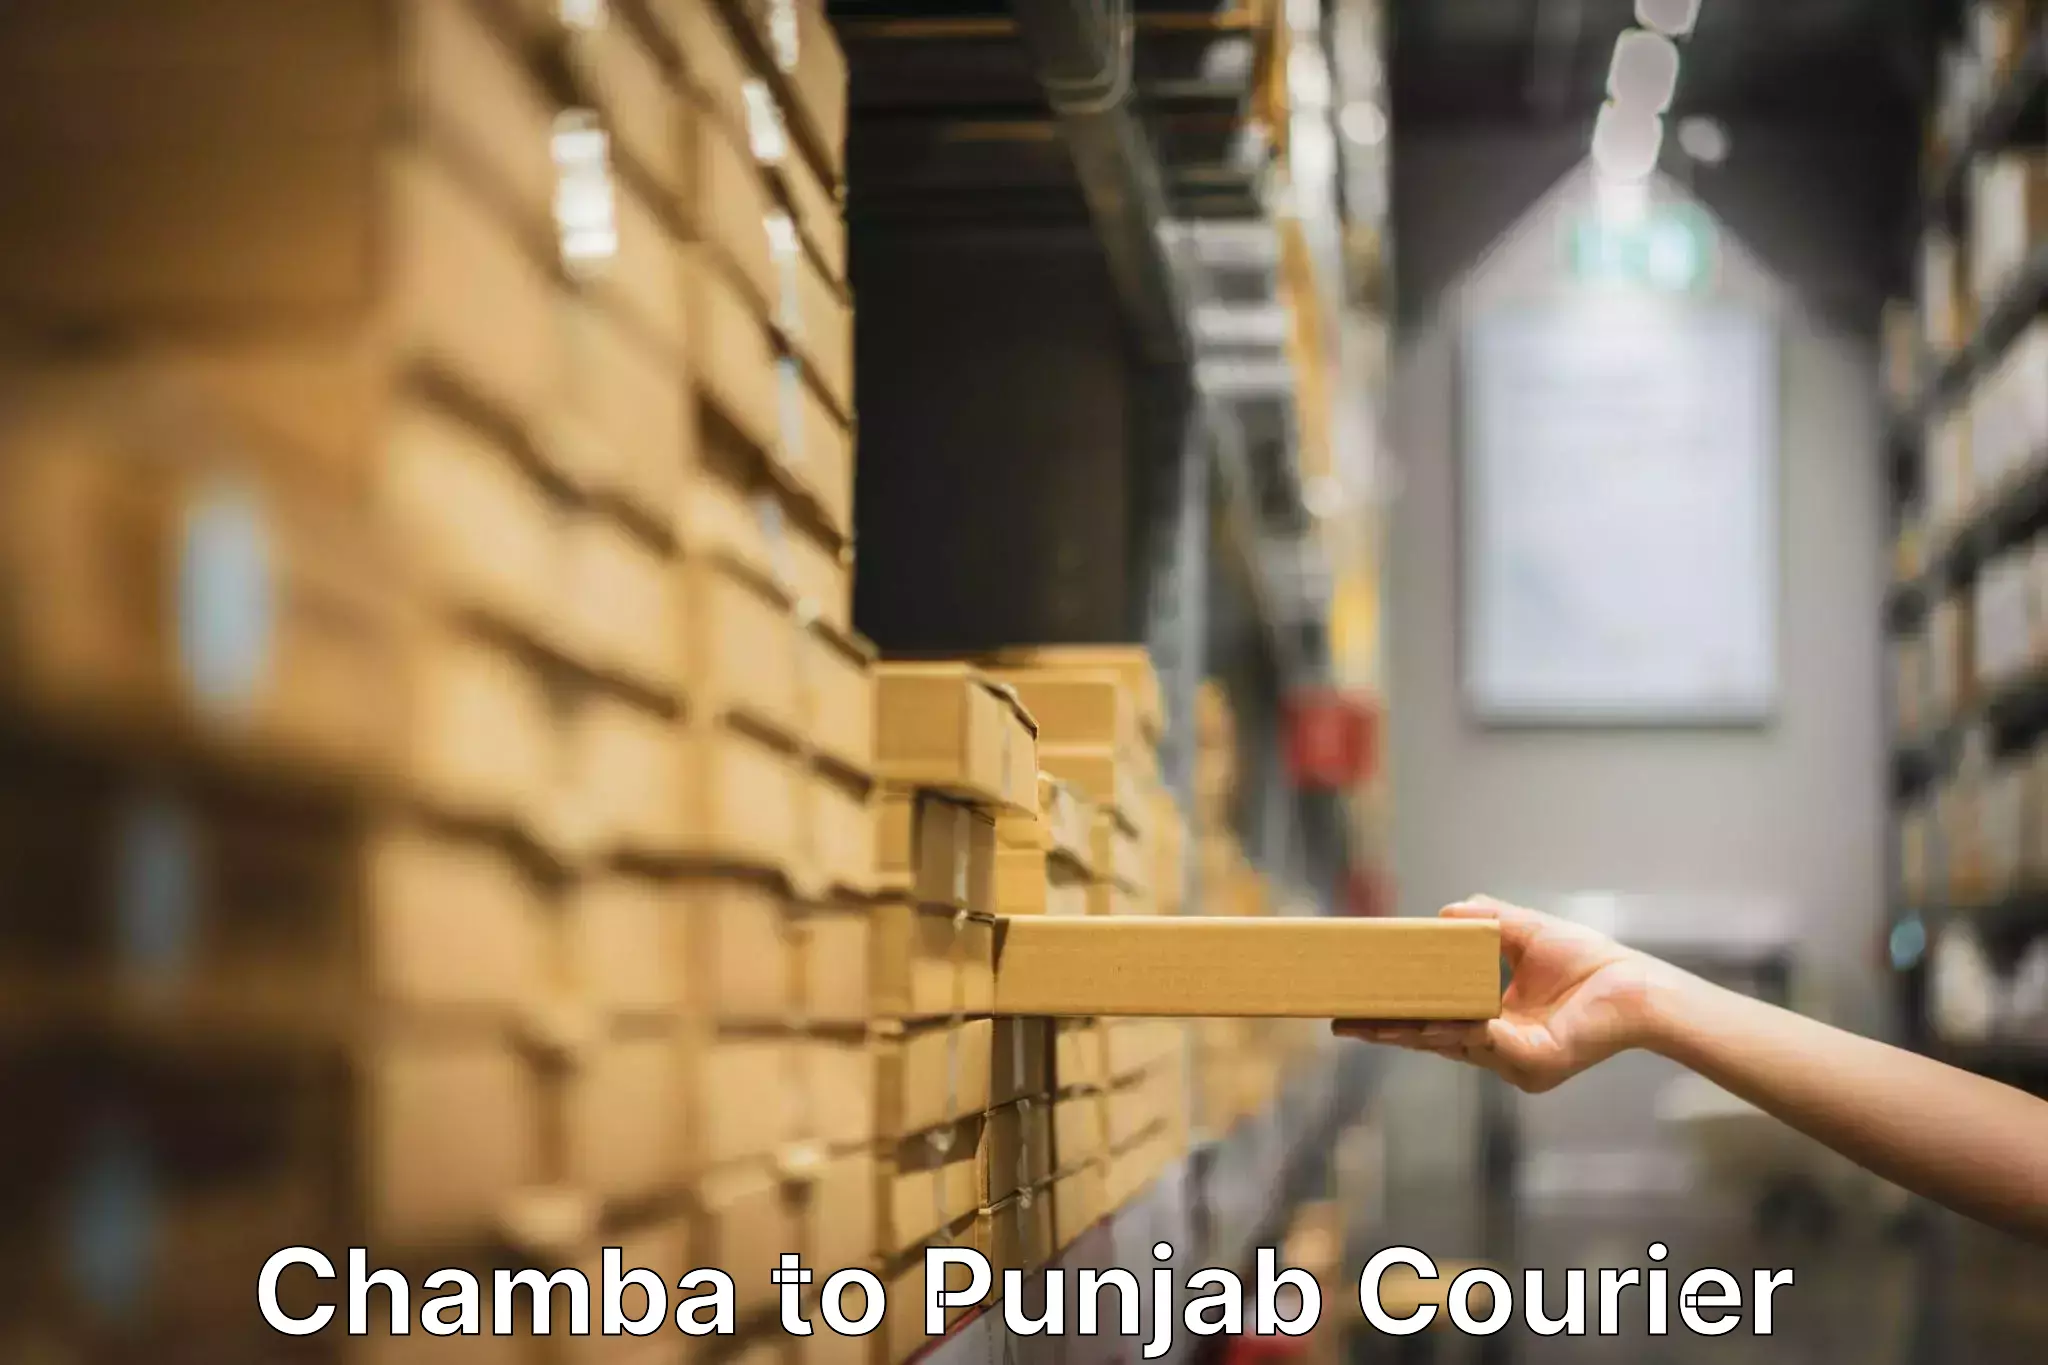 Quality relocation assistance in Chamba to Punjab